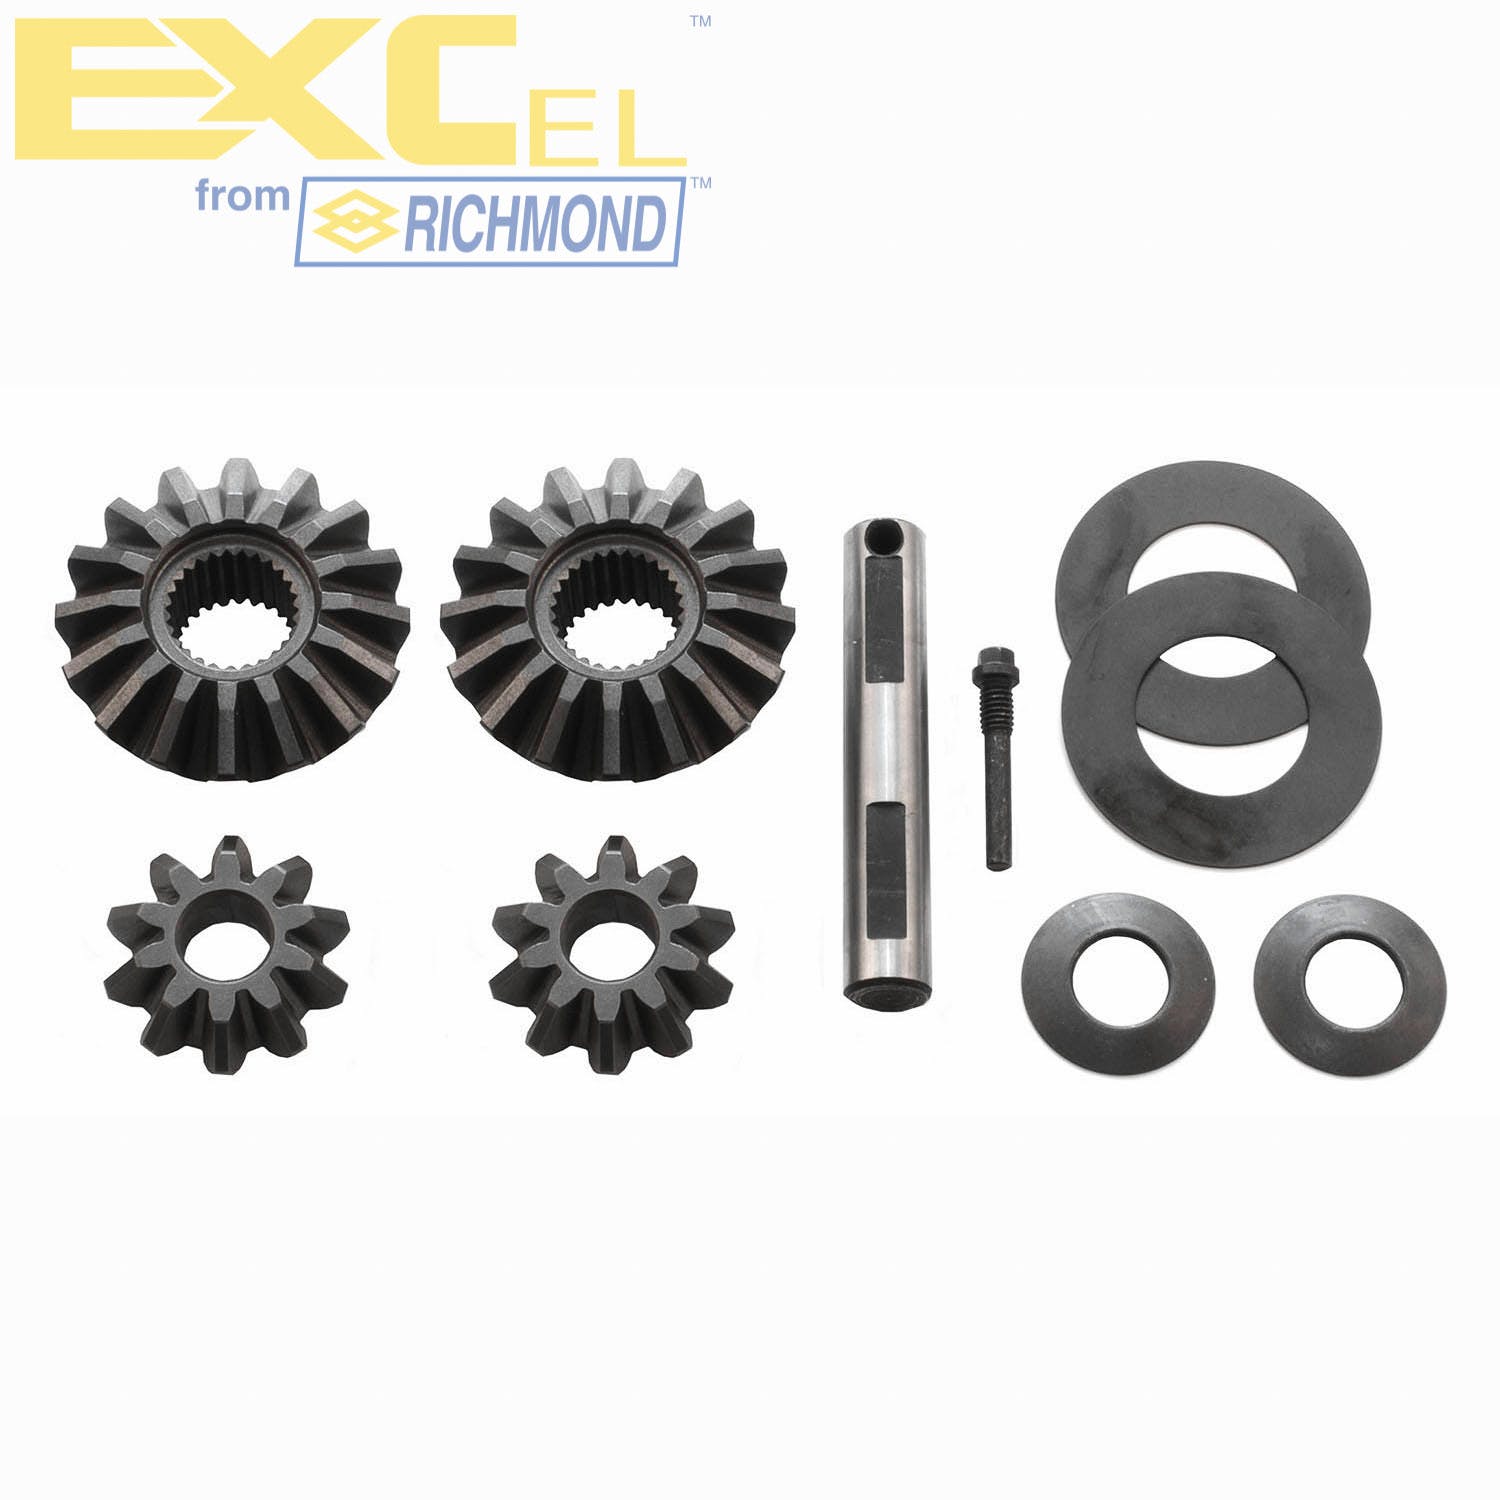 Excel XL-4040 Differential Carrier Gear Kit